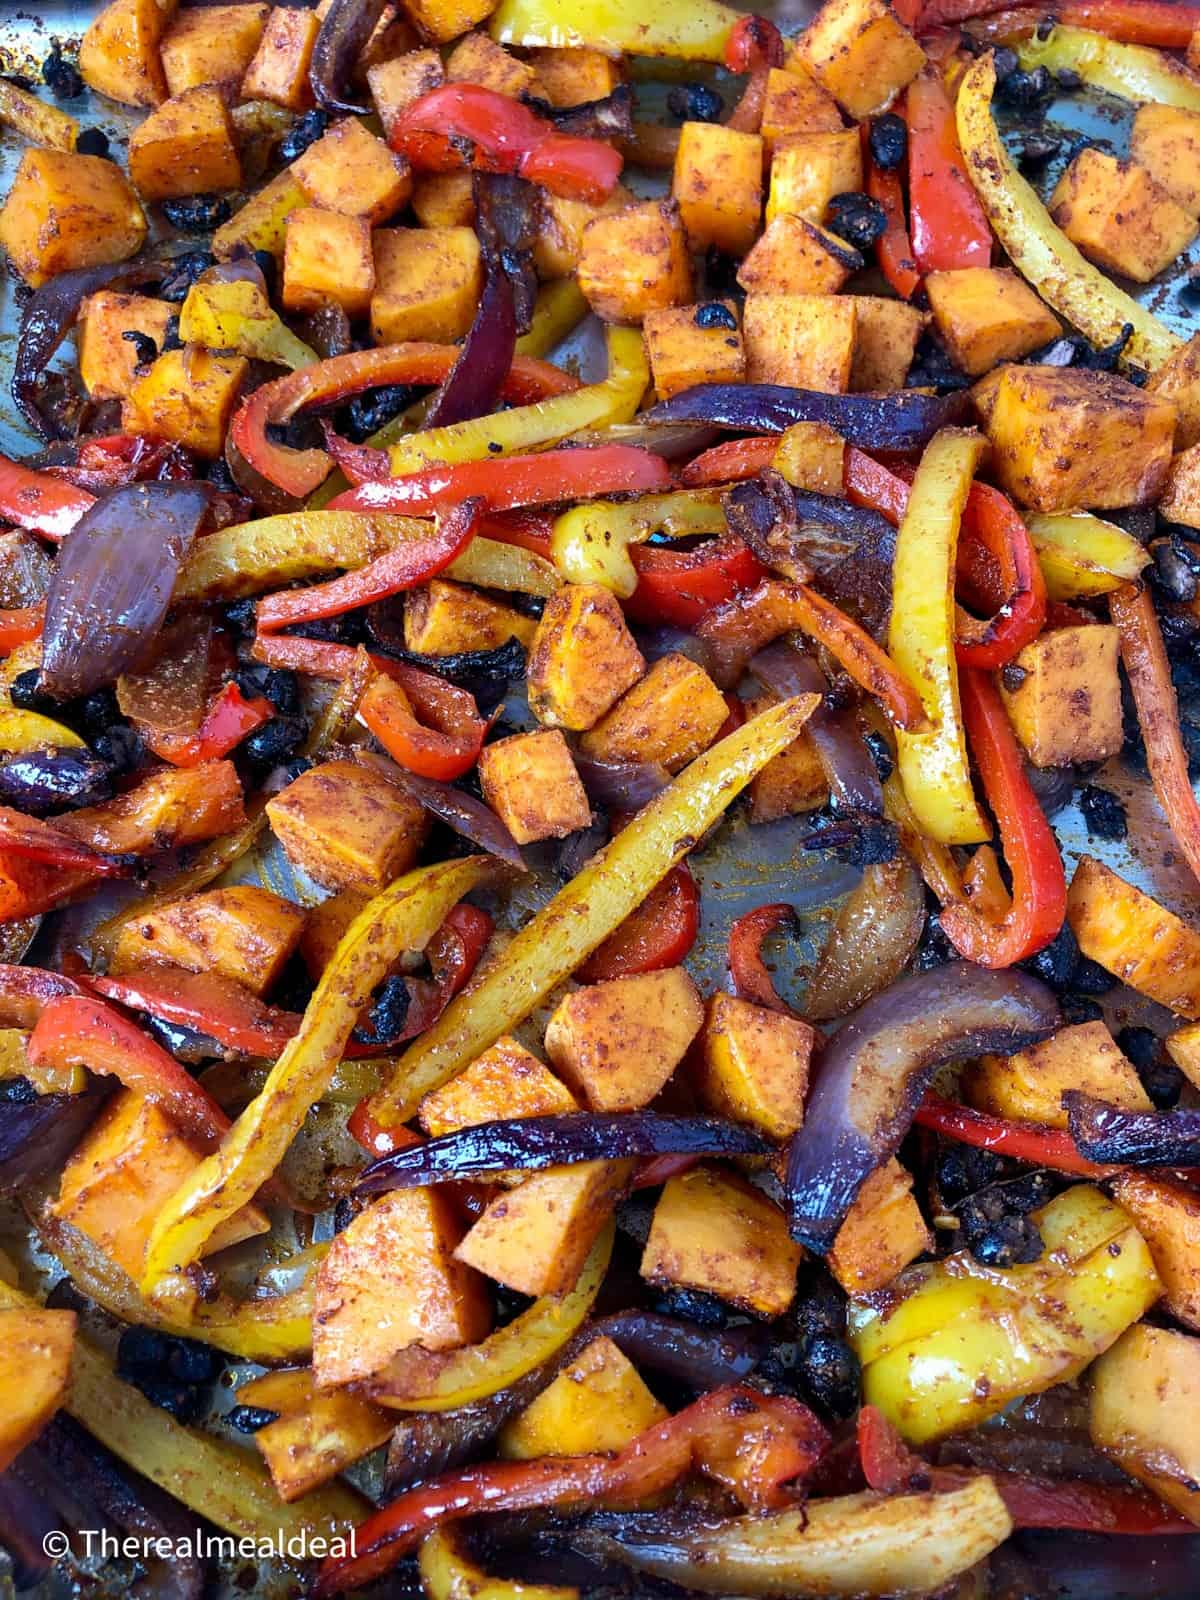 Roasted red and yellow peppers red onions sweet potatoes and black beans in a tray